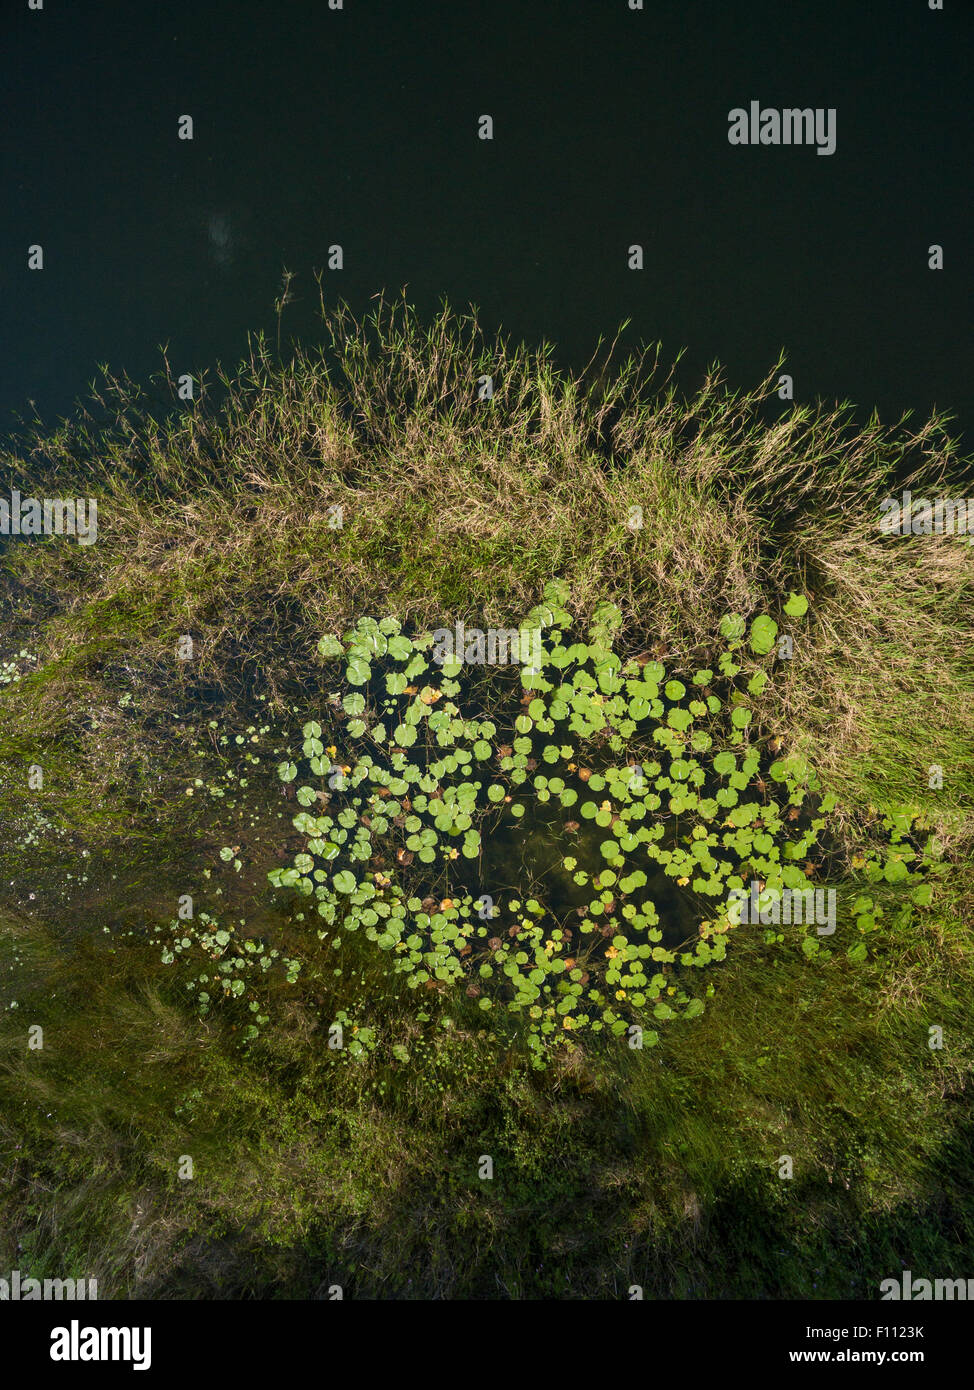 Overhead view of shoreline grasses and lily pads Stock Photo